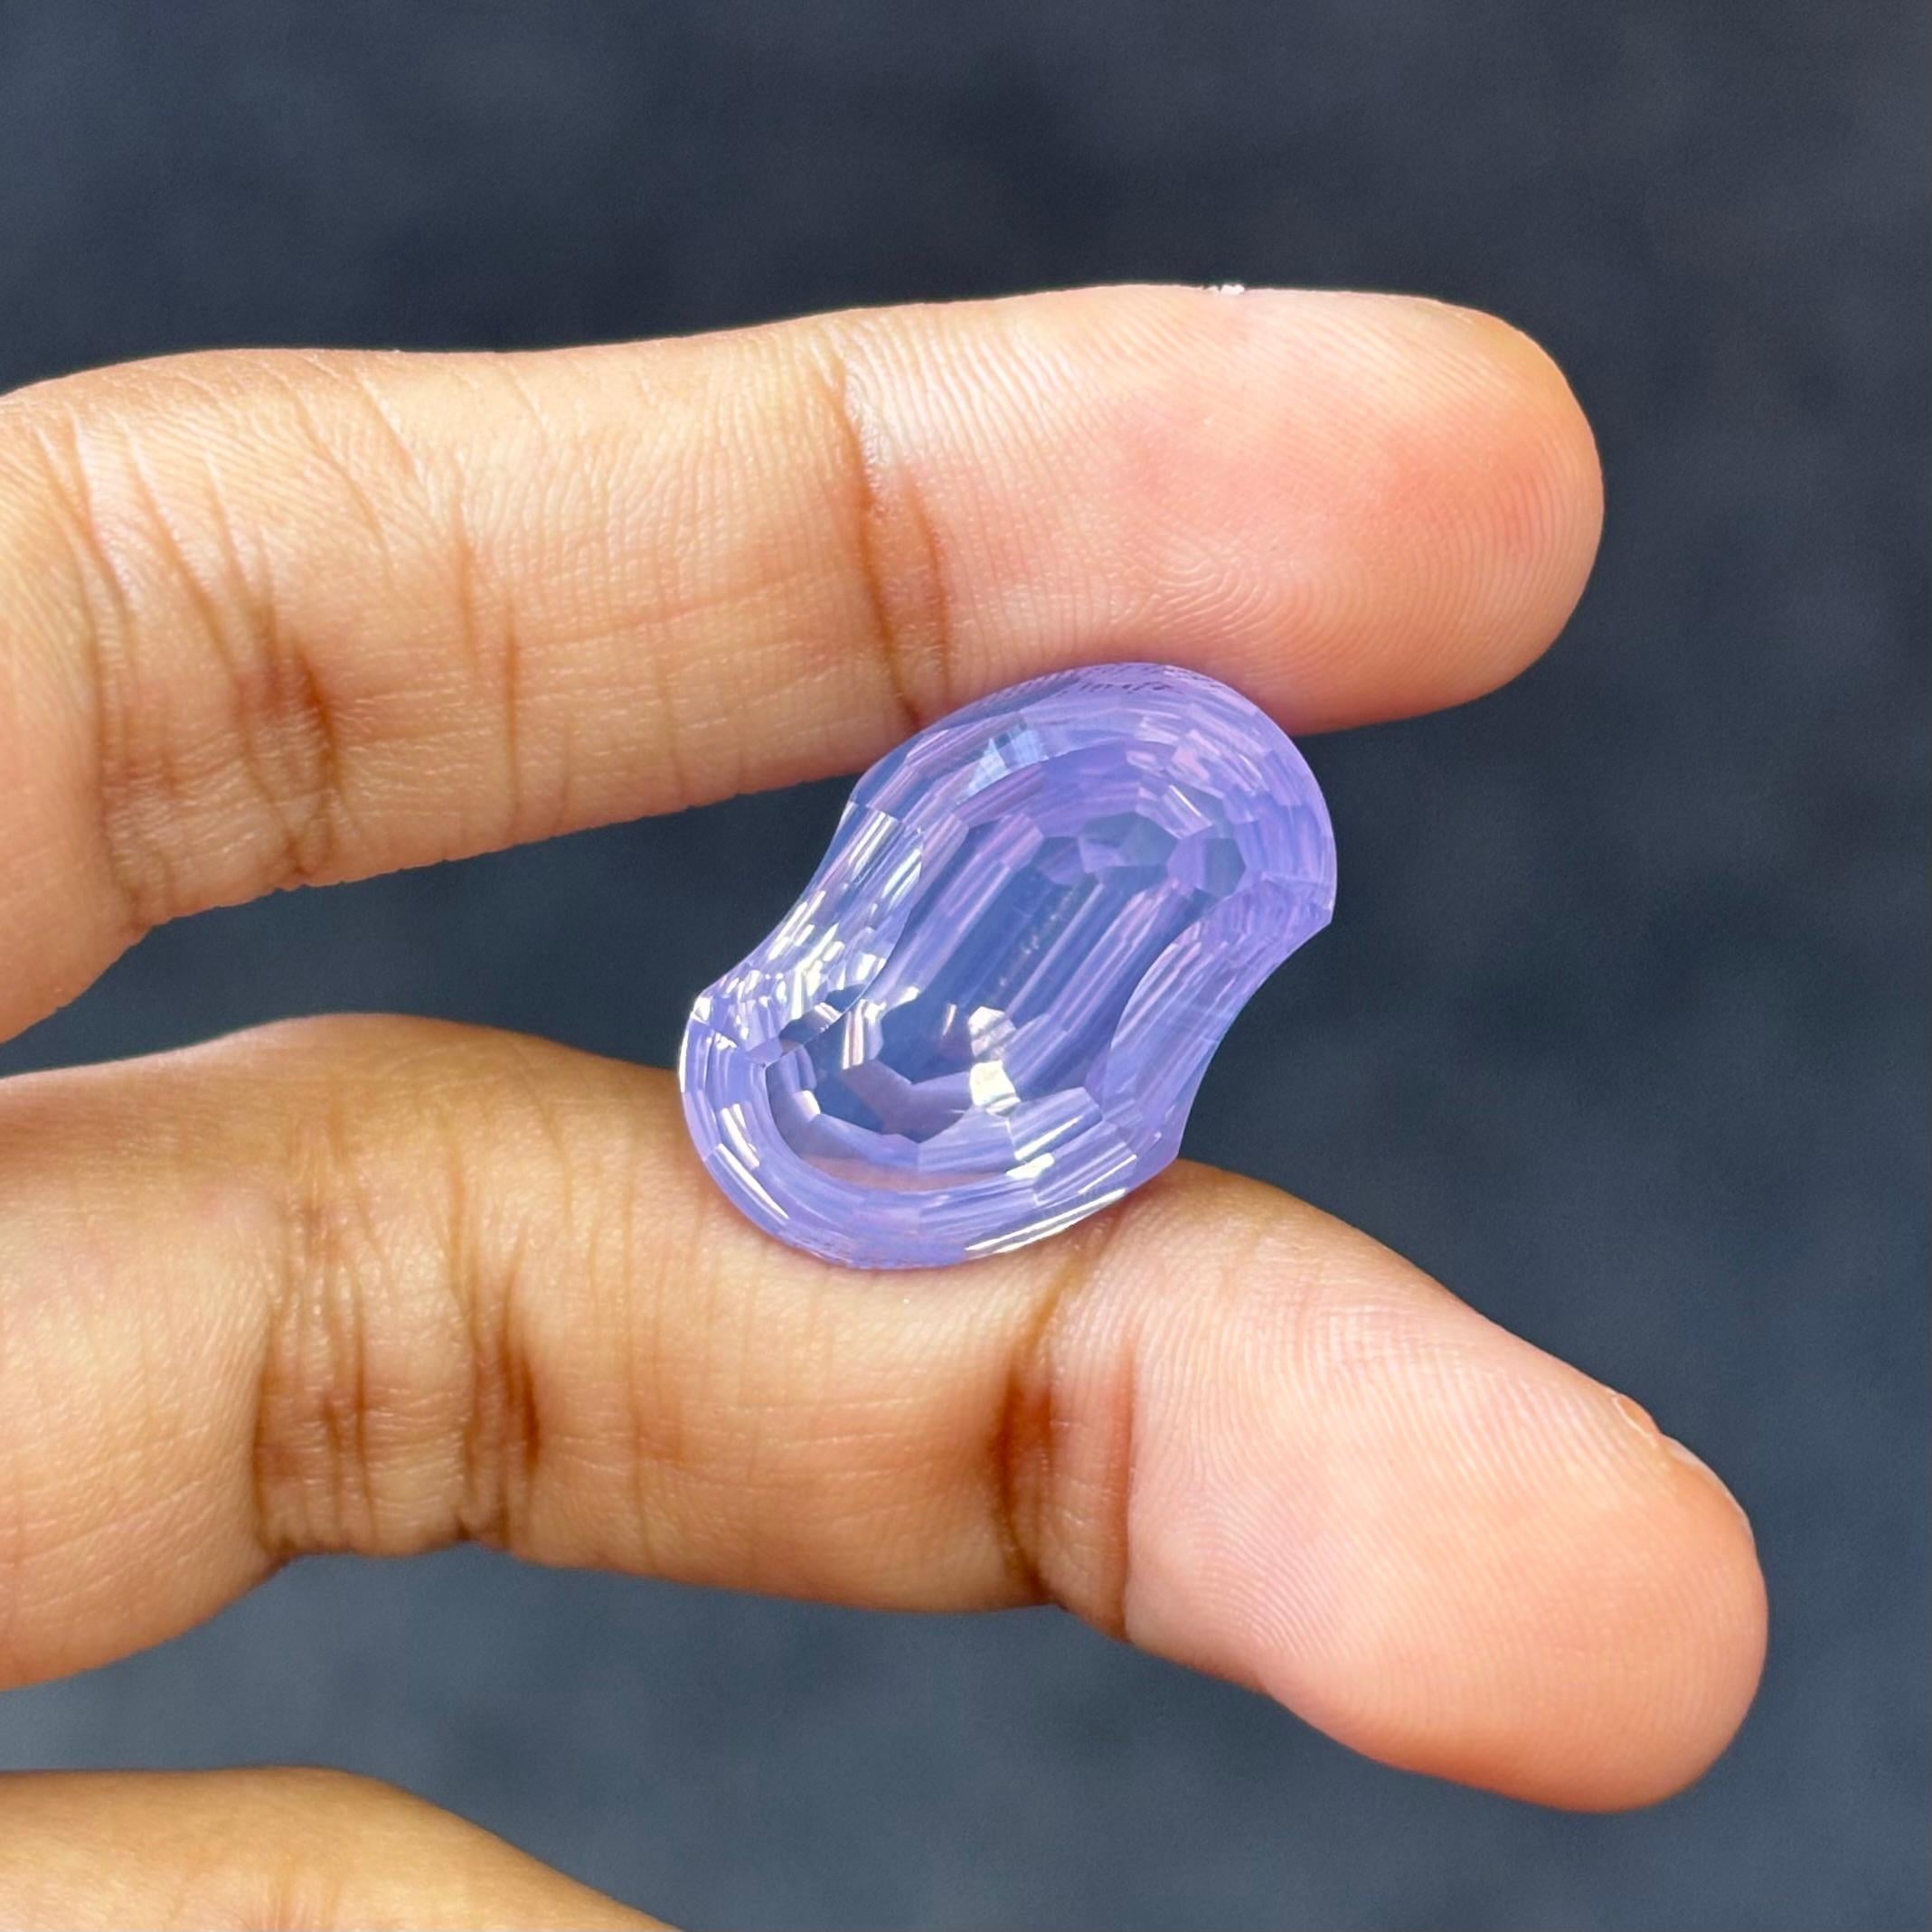 A mesmerising 15.77 Carat Amethyst gemstone. It is completely natural and it is a clean stone.  The amethyst has a unique and breath-taking pastel purple color that is sure to allure you at first sight! The amethyst is cut to perfection in a